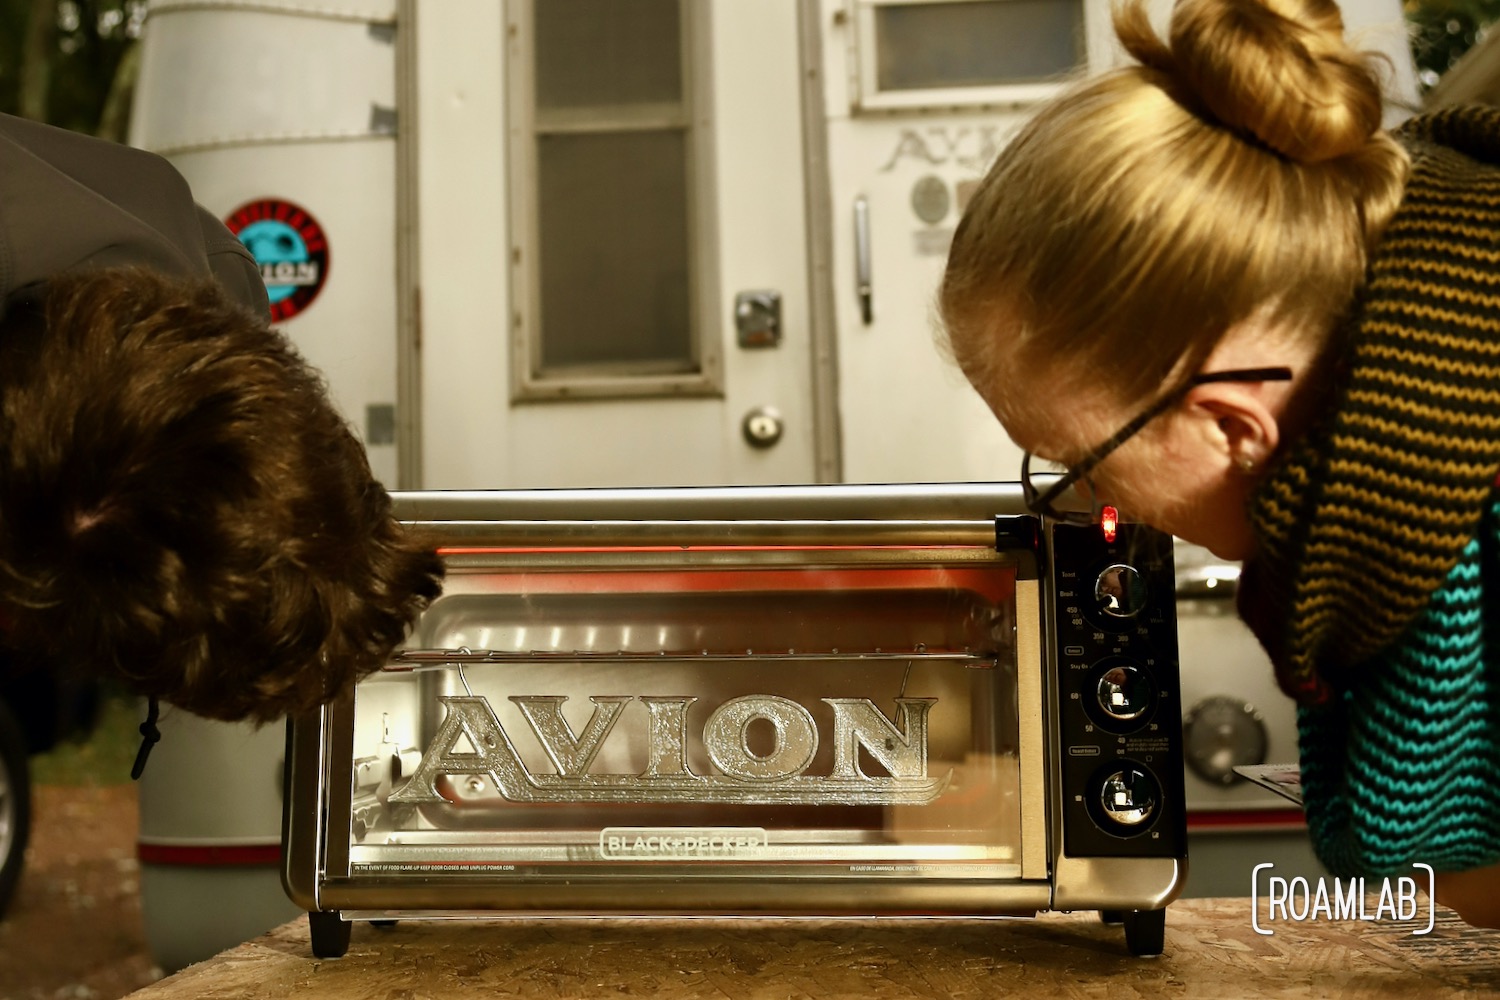 Man and woman watching an Avion emblem with a chrome powder coat cure in a toaster oven.